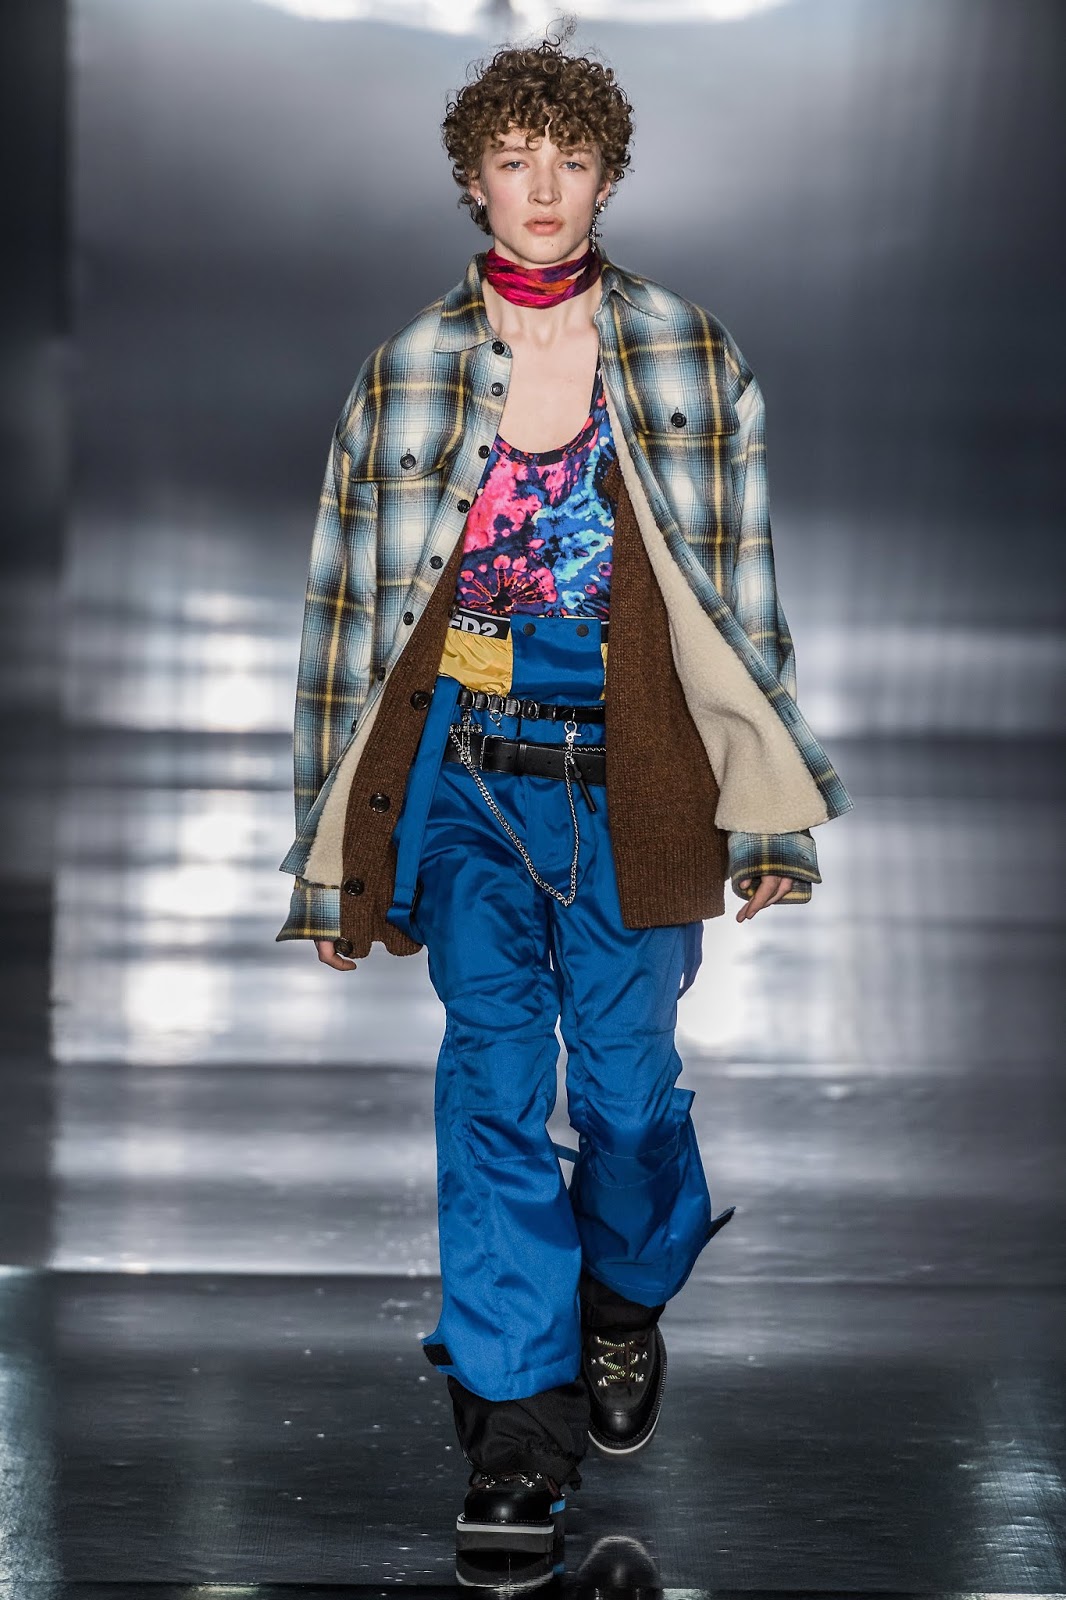 Mom's Turf: Dsquared2 Fall 2019 Ready-To-Wear